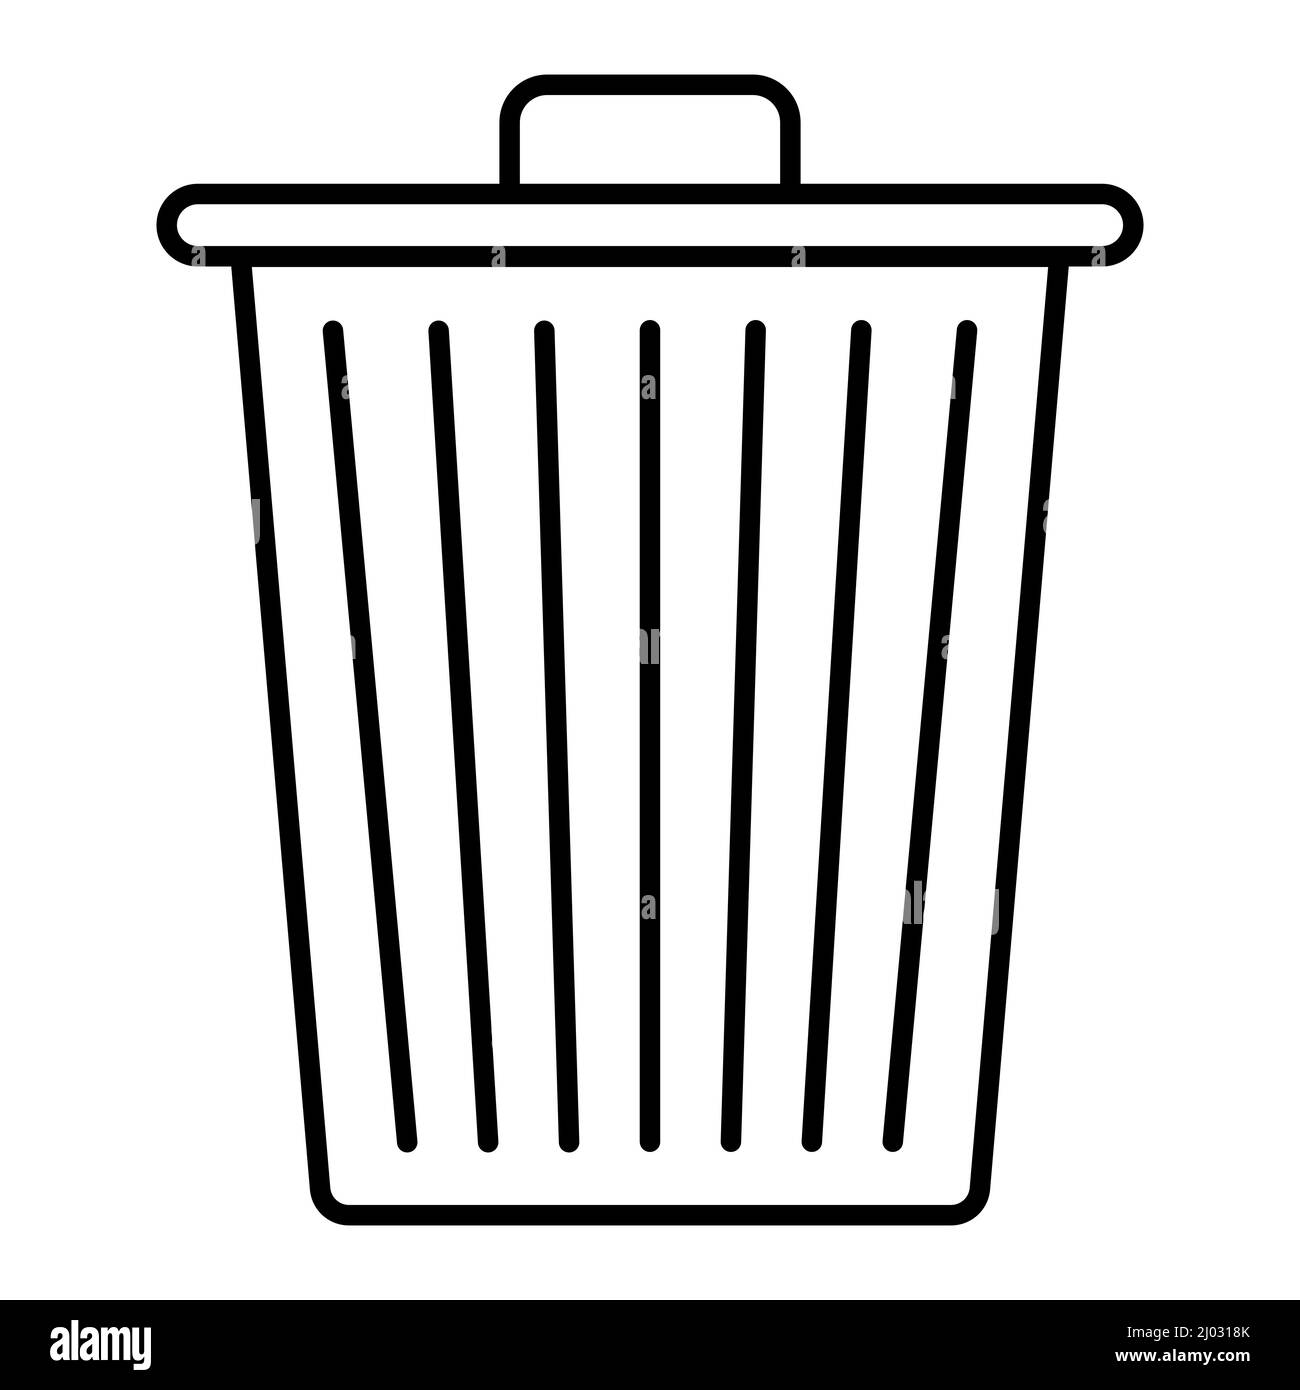 Icon trash can, basket for collecting, sorting and recycling garbage Stock Vector